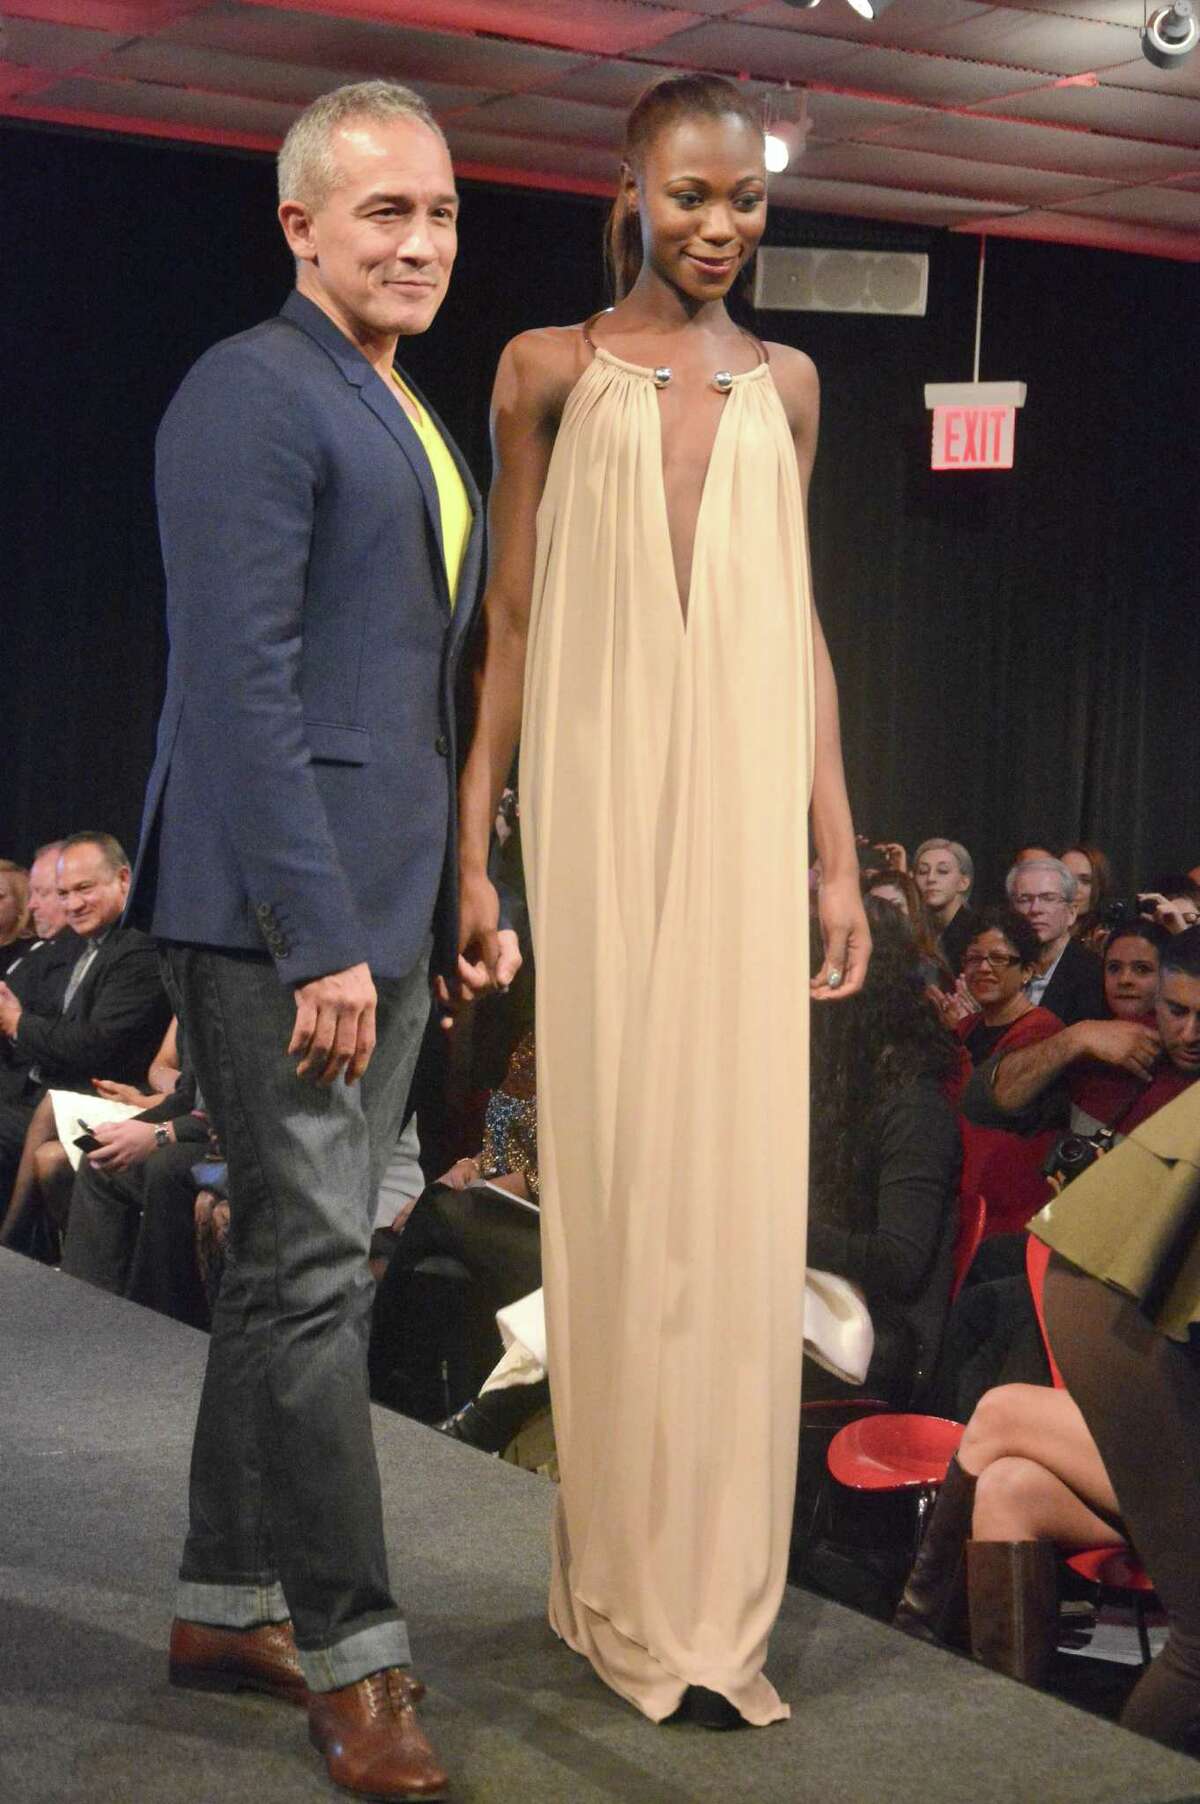 Houston-born designer and New York Fashion Week regular Cesar Galindo, third from left, strikes a pose with models after showing his fall/winter 2015 collection in New York. On July 30, 2015, Galindo will present a free fashion show at San Antonio’s St. Anthony Hotel highlighting that collection.